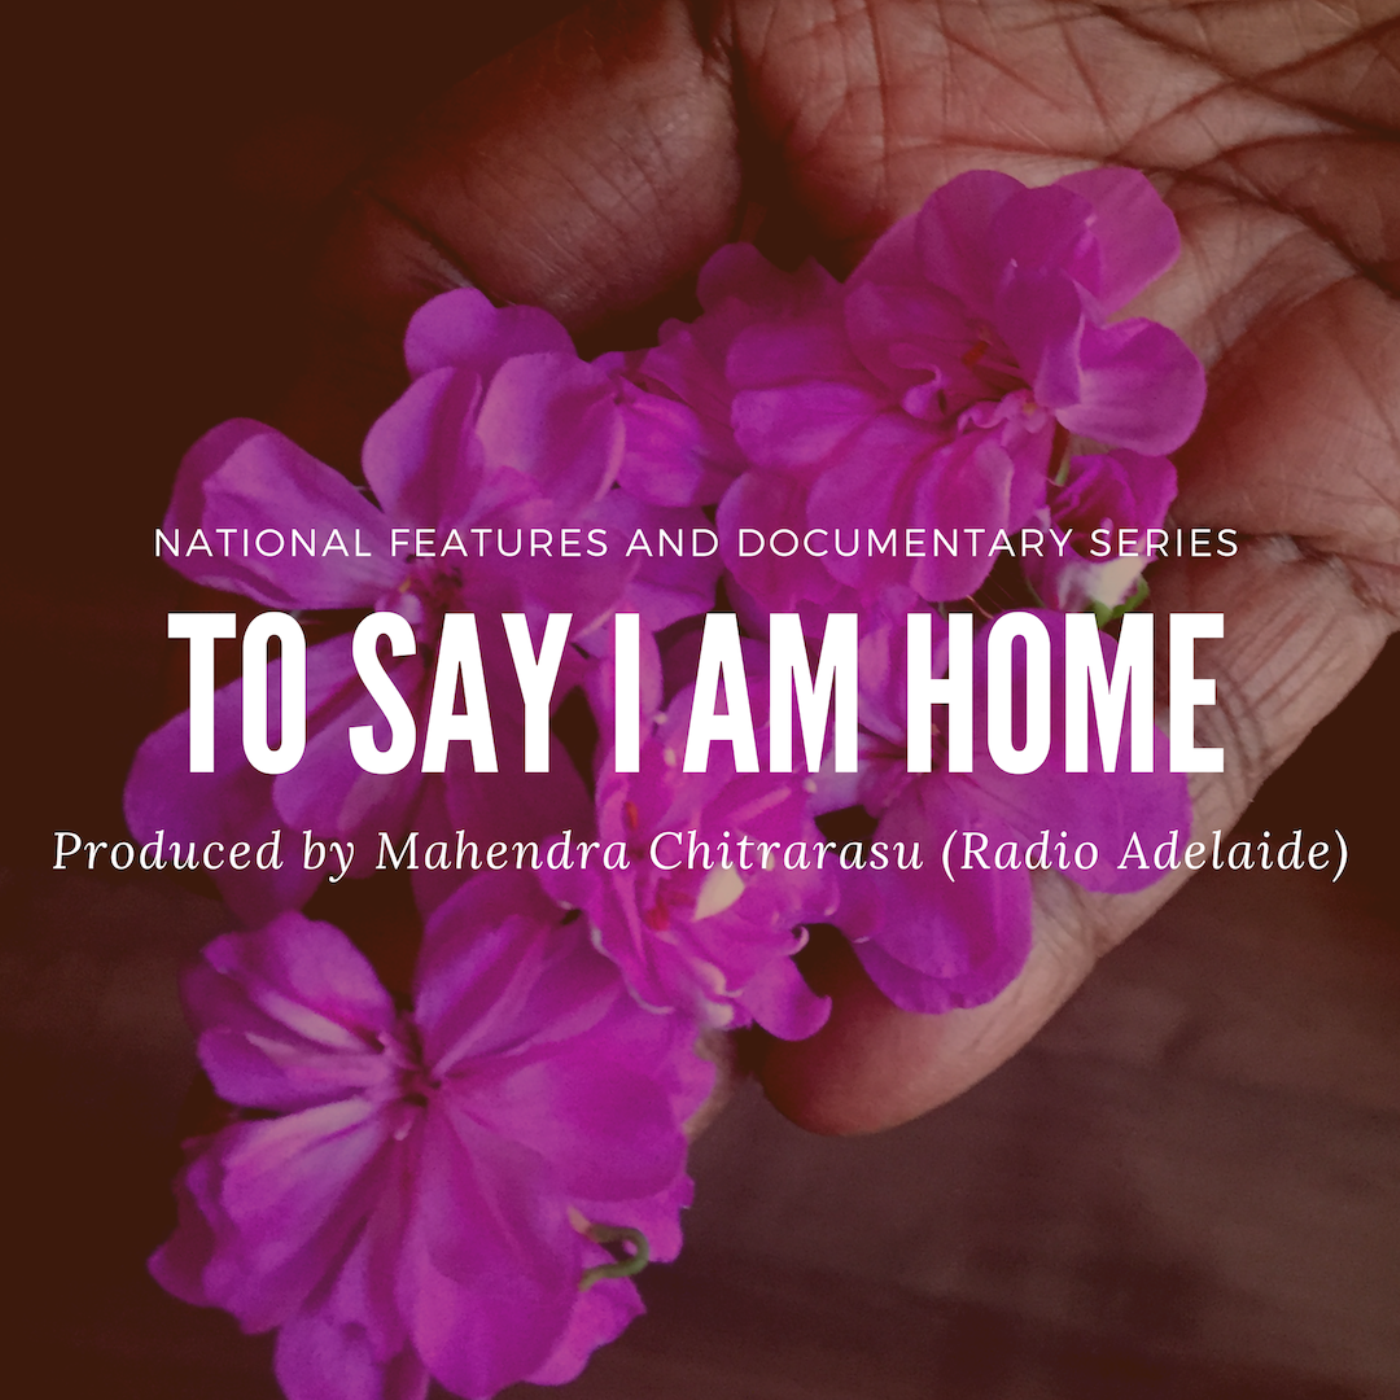 To Say I Am Home (Radio Adelaide)